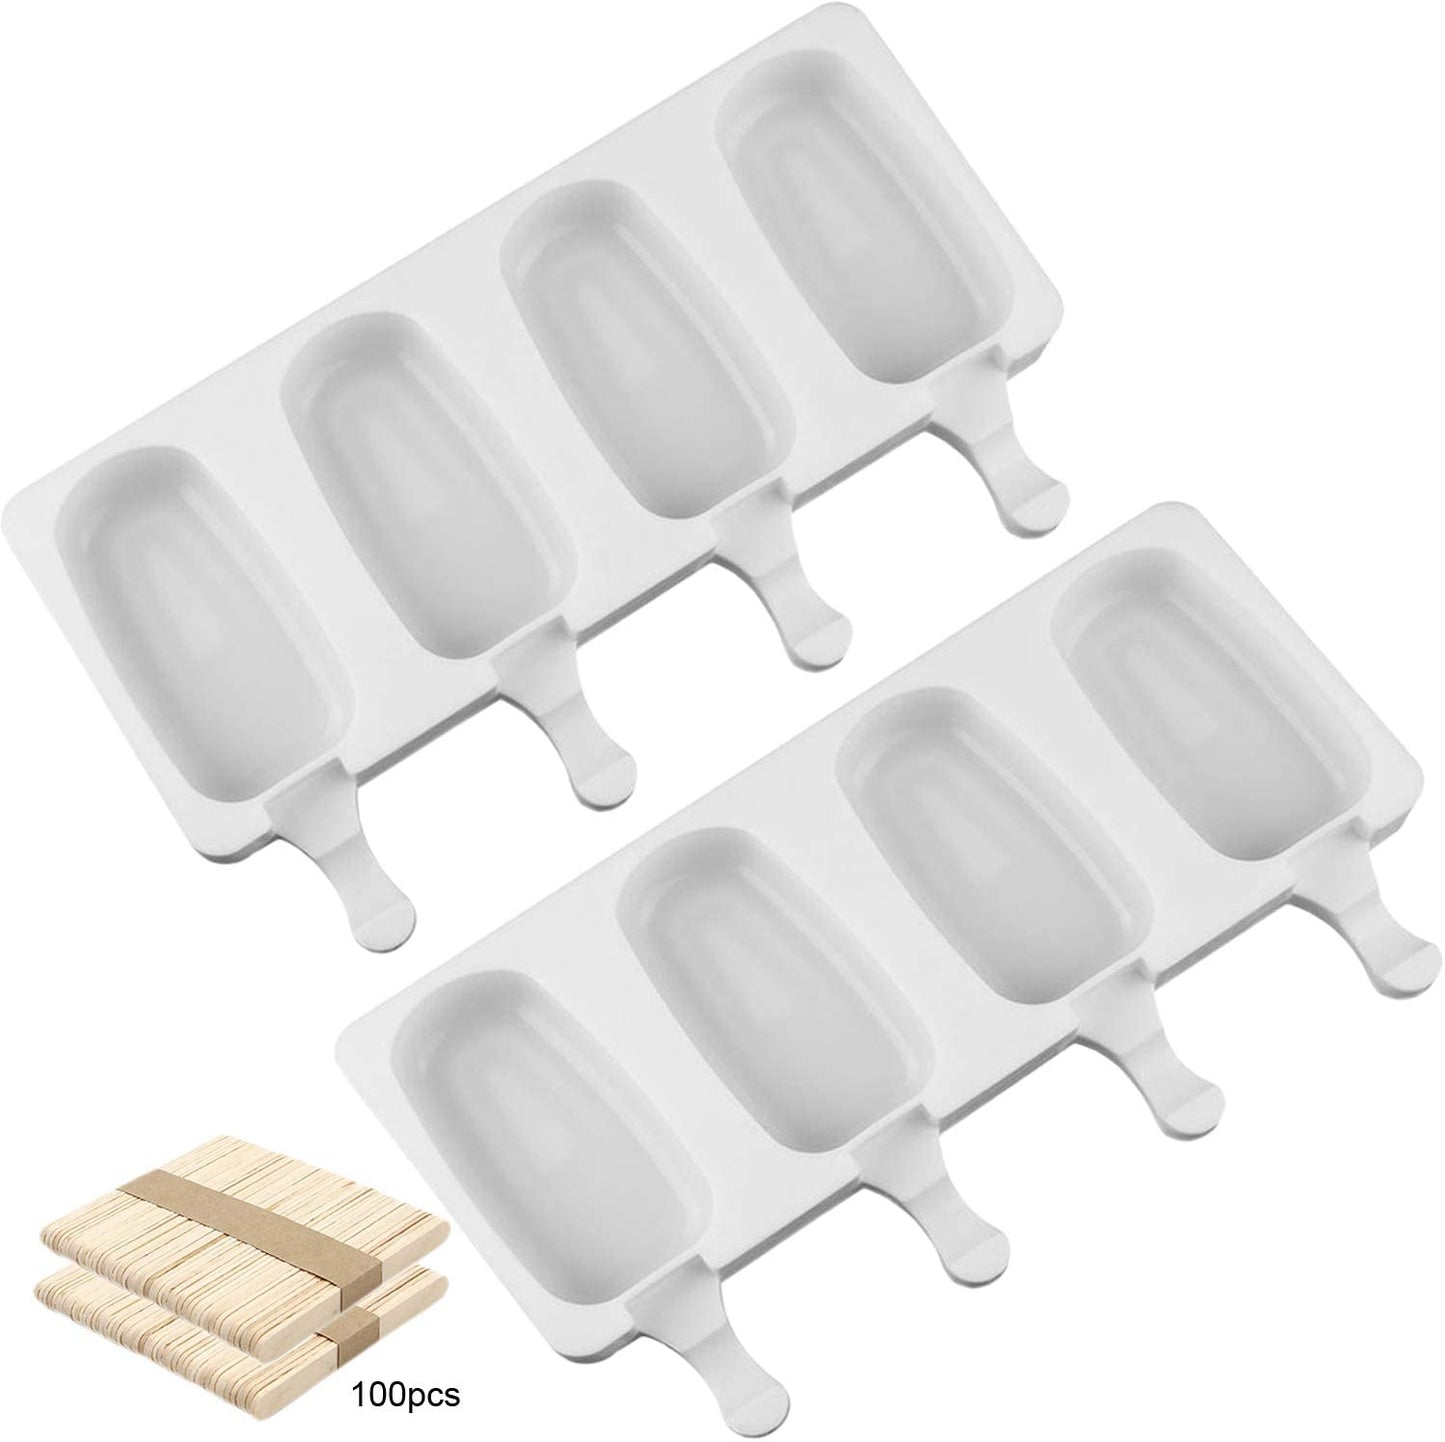 Silicon Standard Cakesicles Popsicles Mold 4 Cavity 3.5″ x 1.75″ With Stick